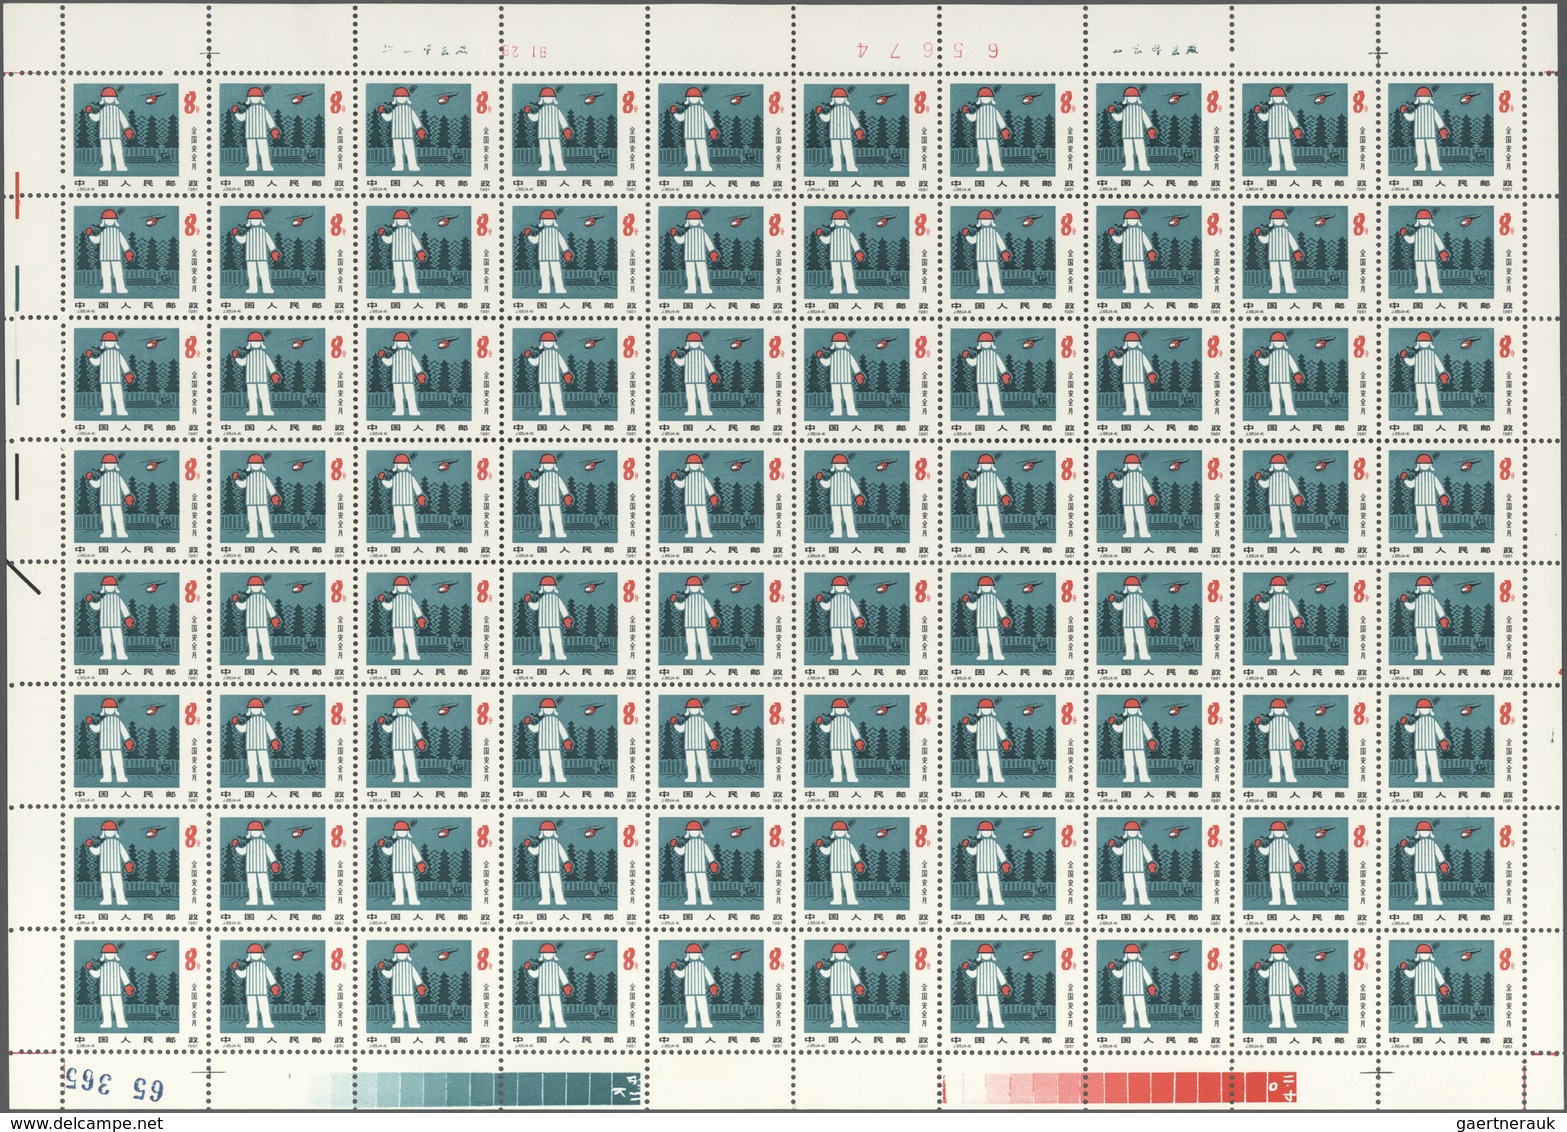 China - Volksrepublik: 1981, National Safety Month, 80 complete sets of 4 on full sheets, all MNH, a